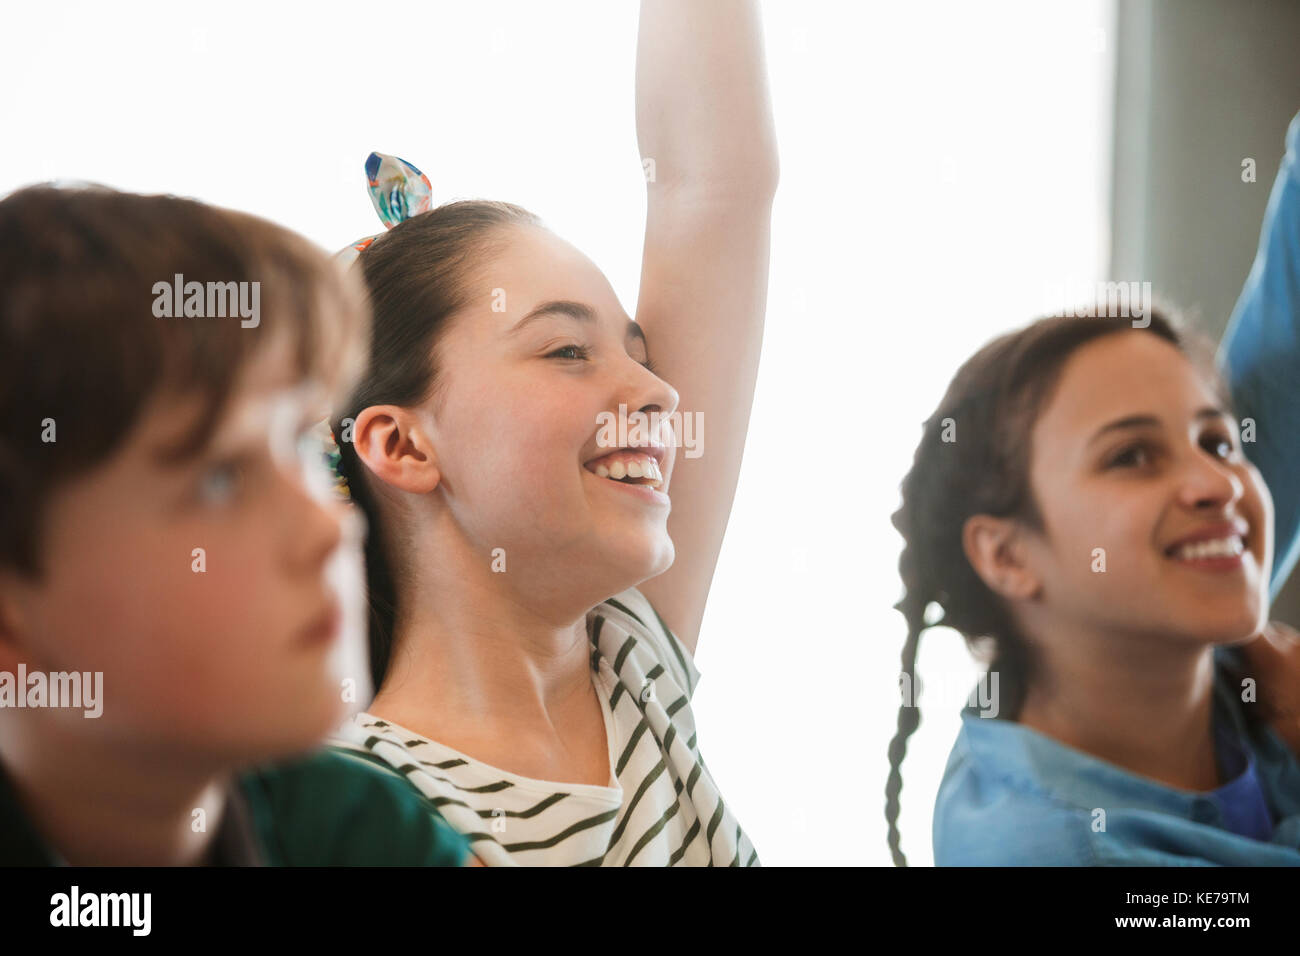 Smiling, eager girl student asking a question in classroom Stock Photo